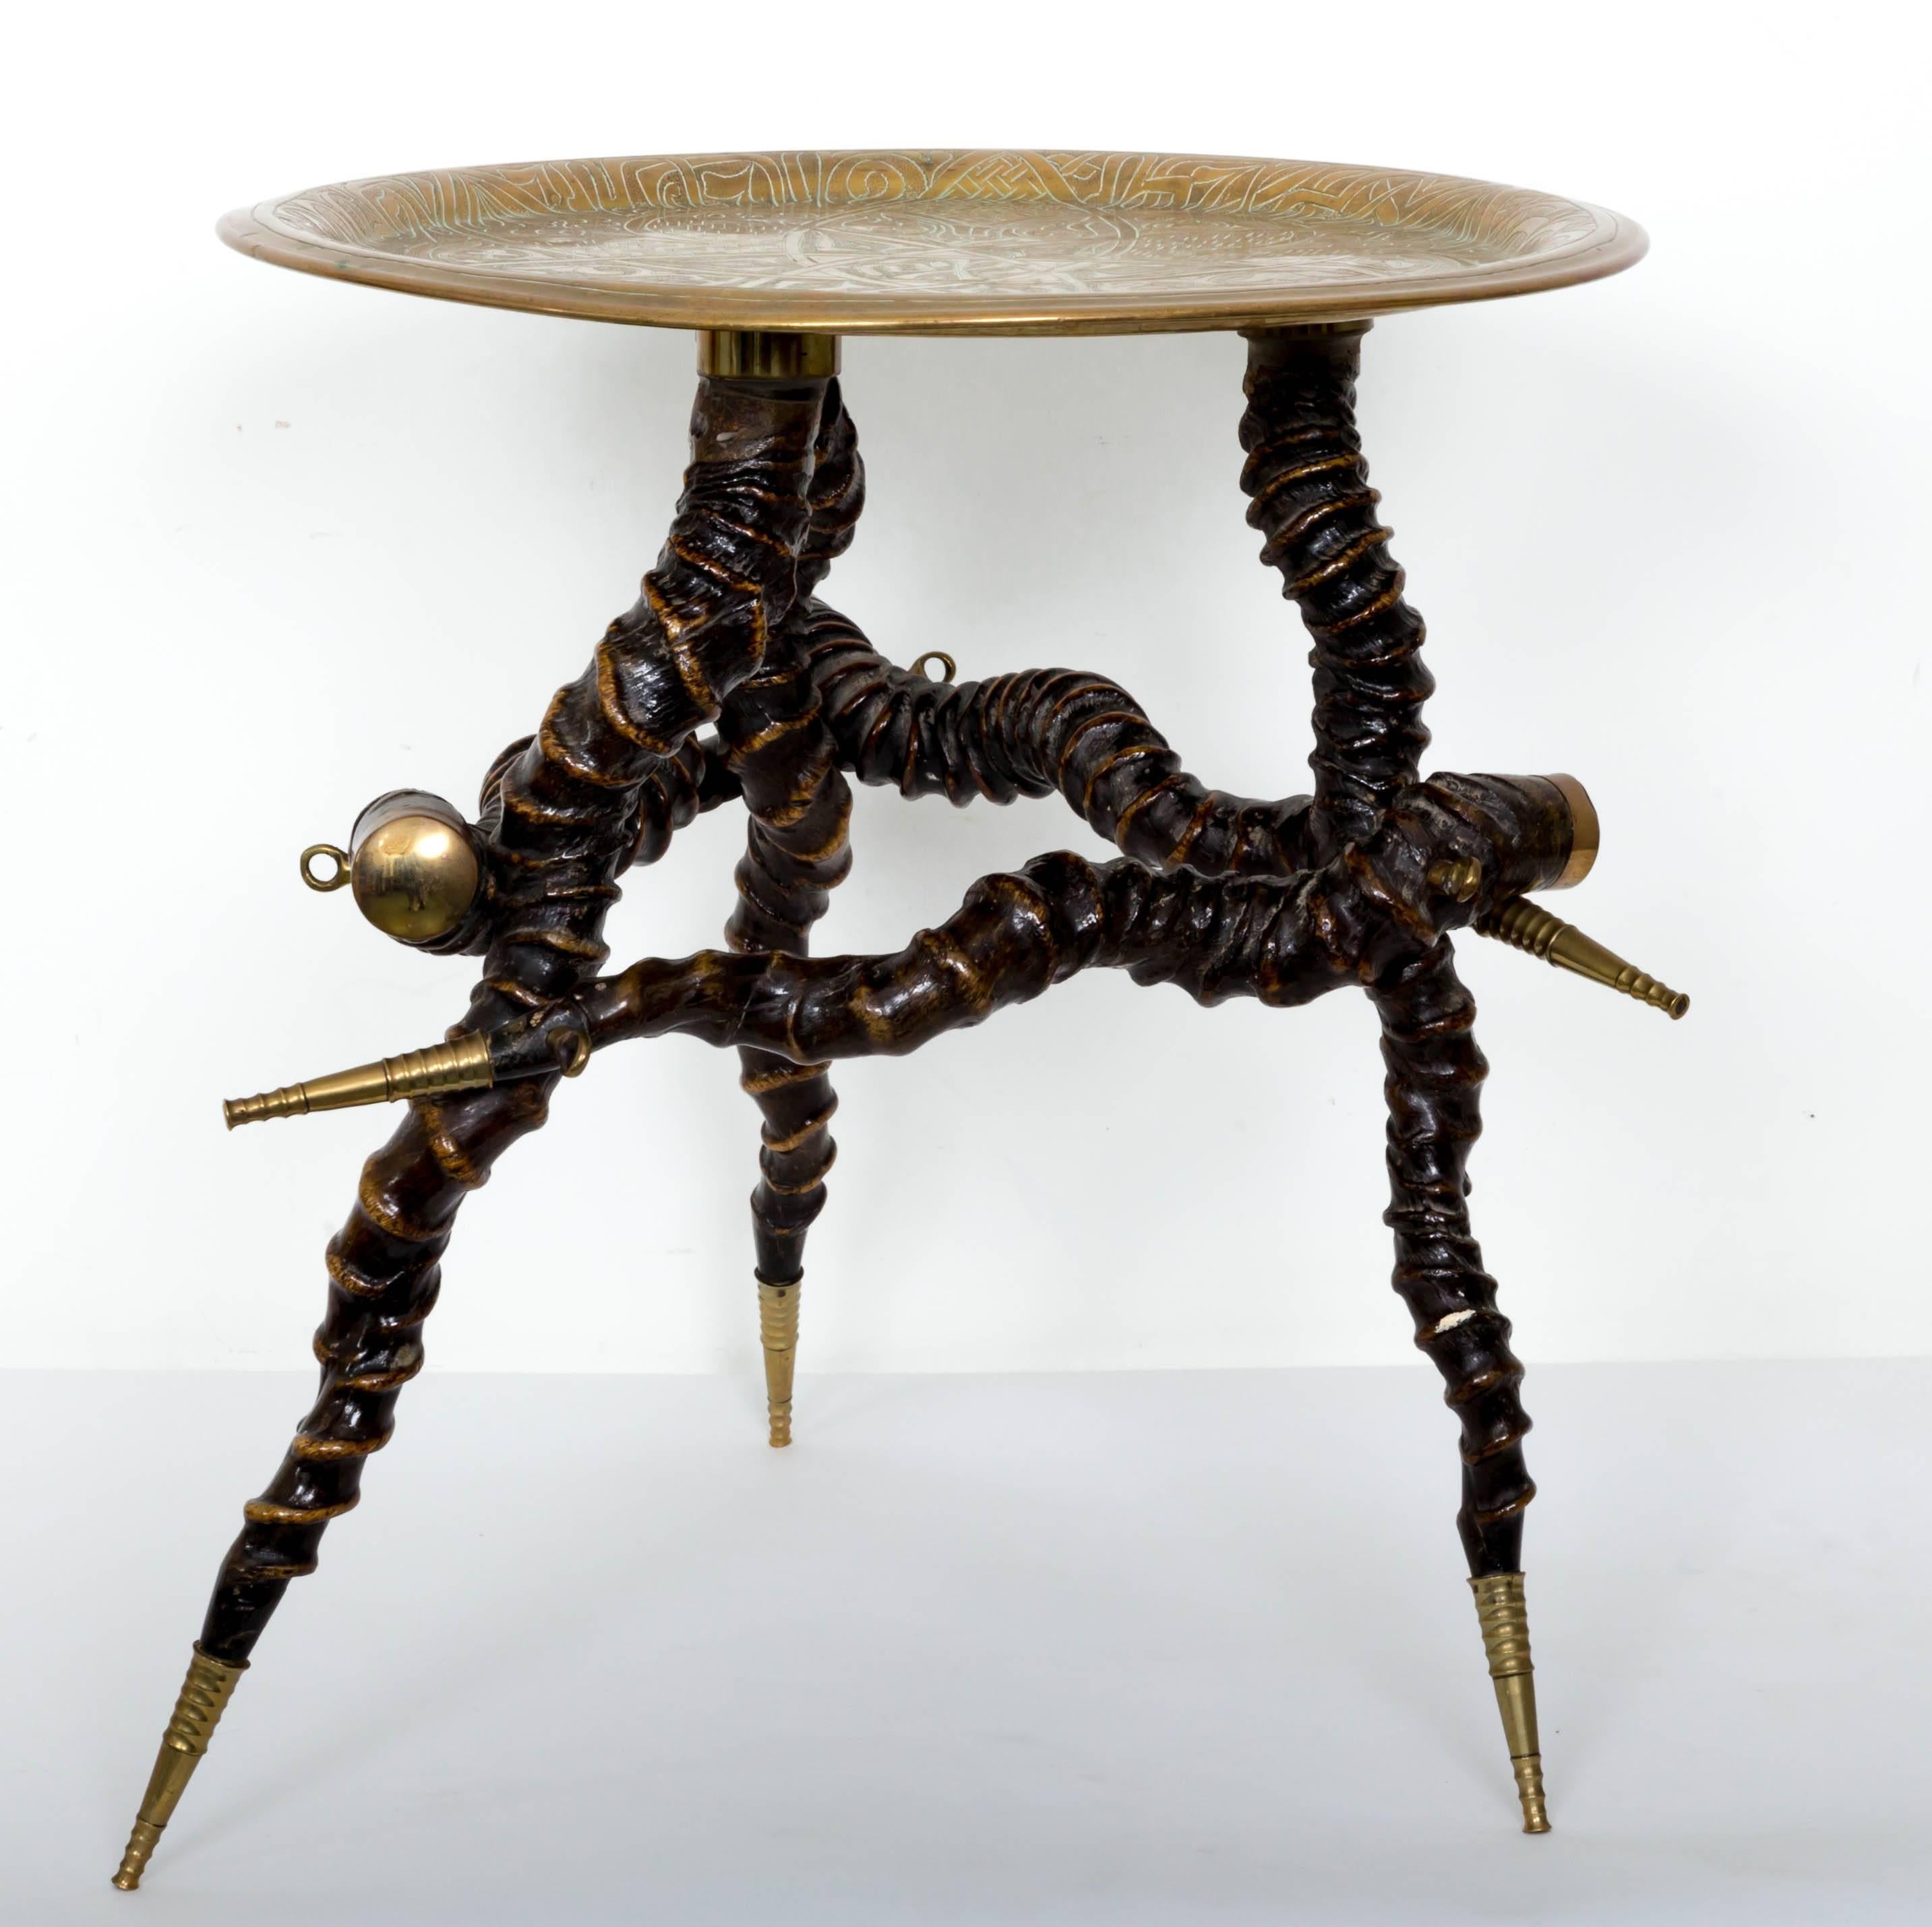 Twisted horn table possibly Impala horns with Indian engraved brass top. Brass tips on horns and brass tips on feet.